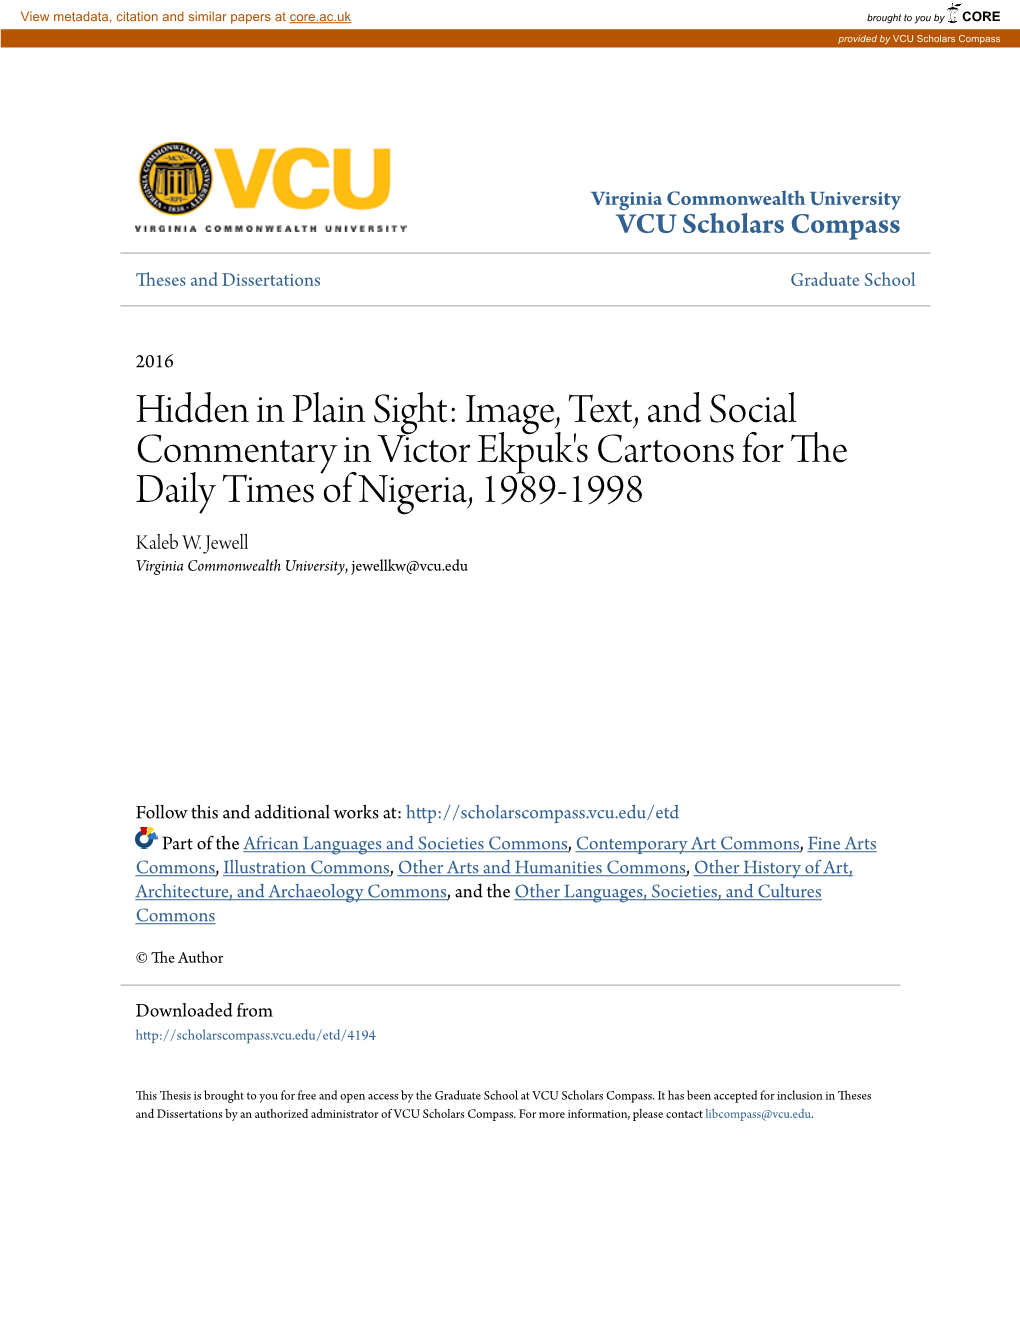 Image, Text, and Social Commentary in Victor Ekpuk's Cartoons for the Daily Times of Nigeria, 1989-1998 Kaleb W